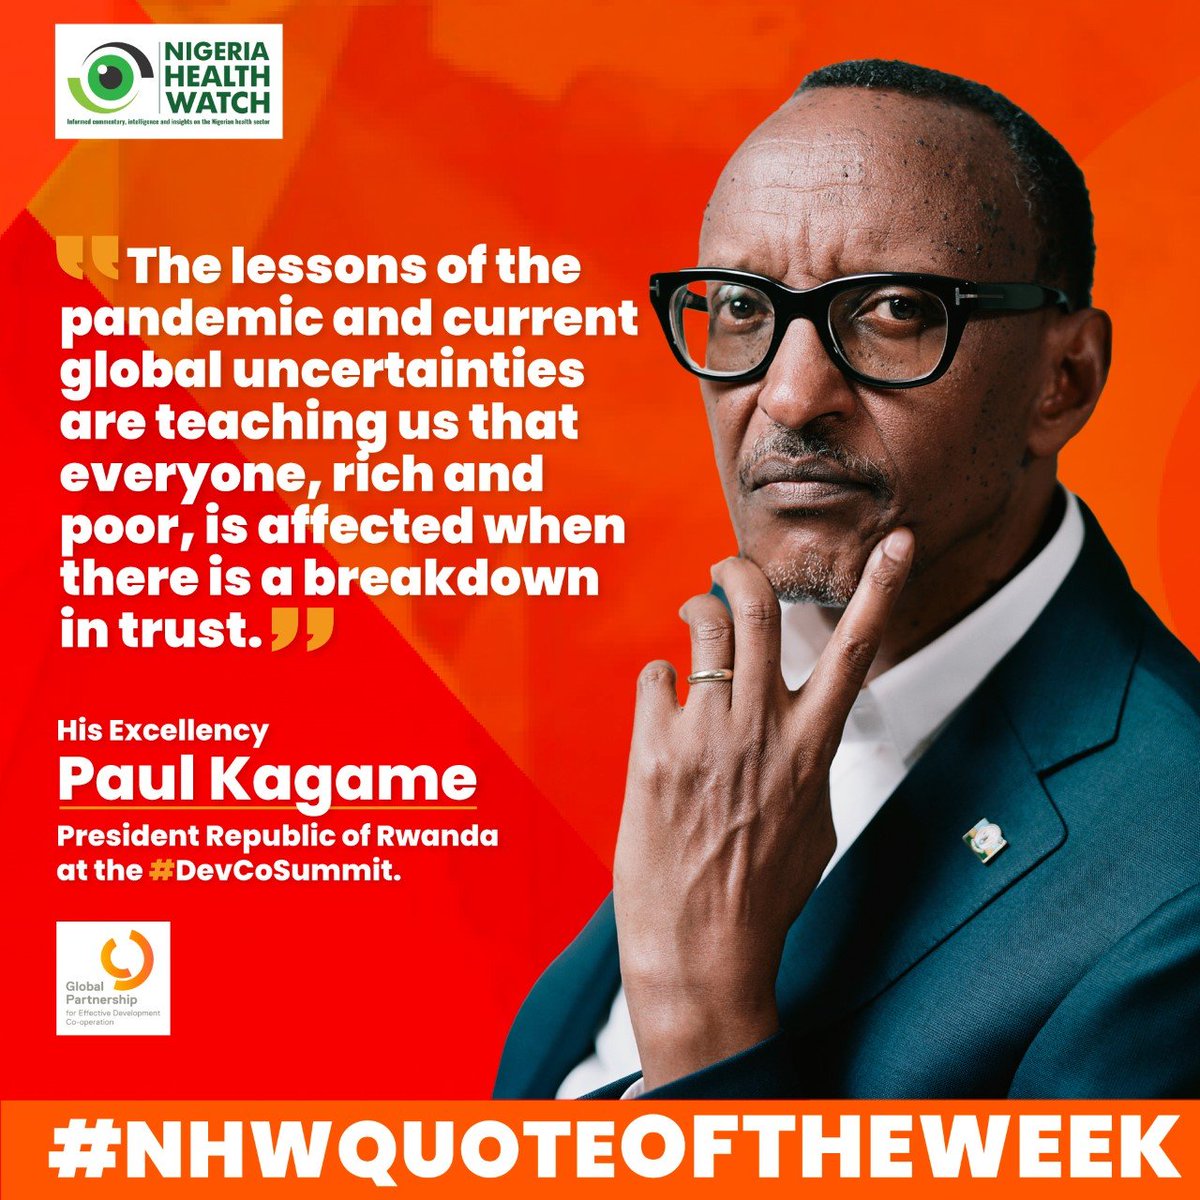 #NHWQUOTEOFTHEWEEK

One major lesson #COVID19 has taught the world is that responding to public health threats hinges on building public trust.

The risk of future pandemics remains. We must learn from past lessons to better prepare for future public health threats.
#DevCoSummit